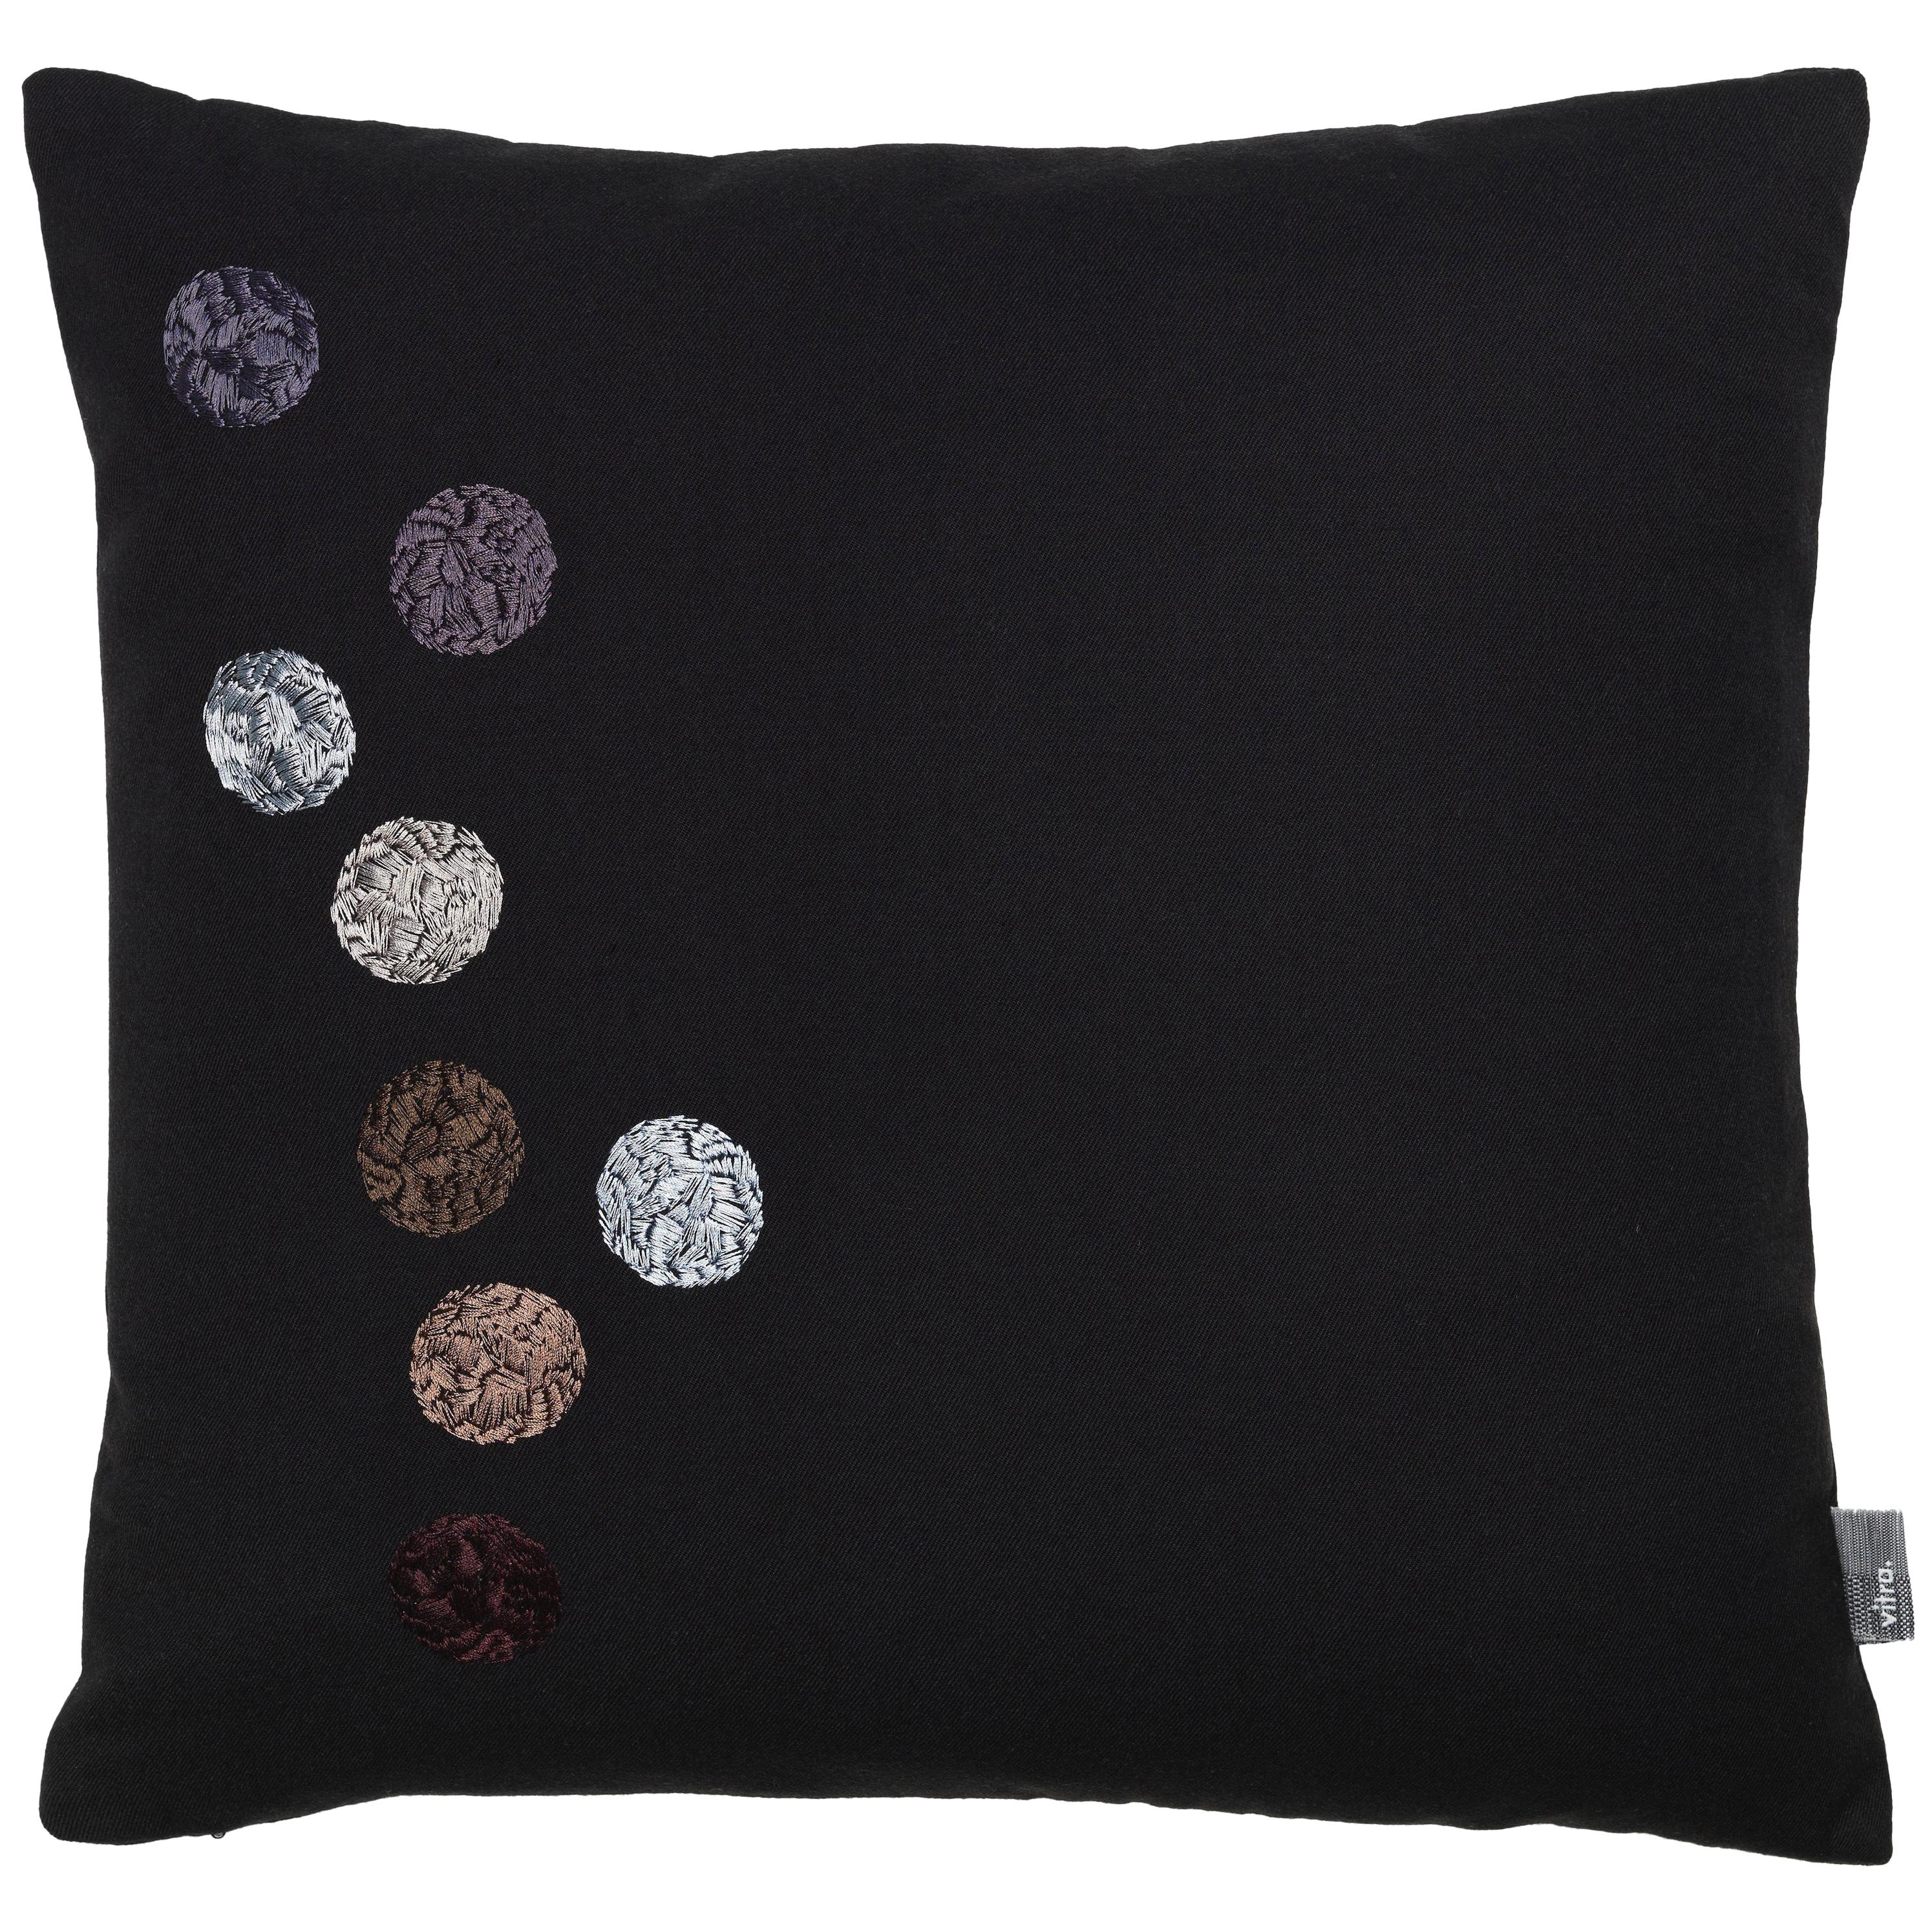 Vitra Dot Pillow in Black by Hella Jongerius For Sale